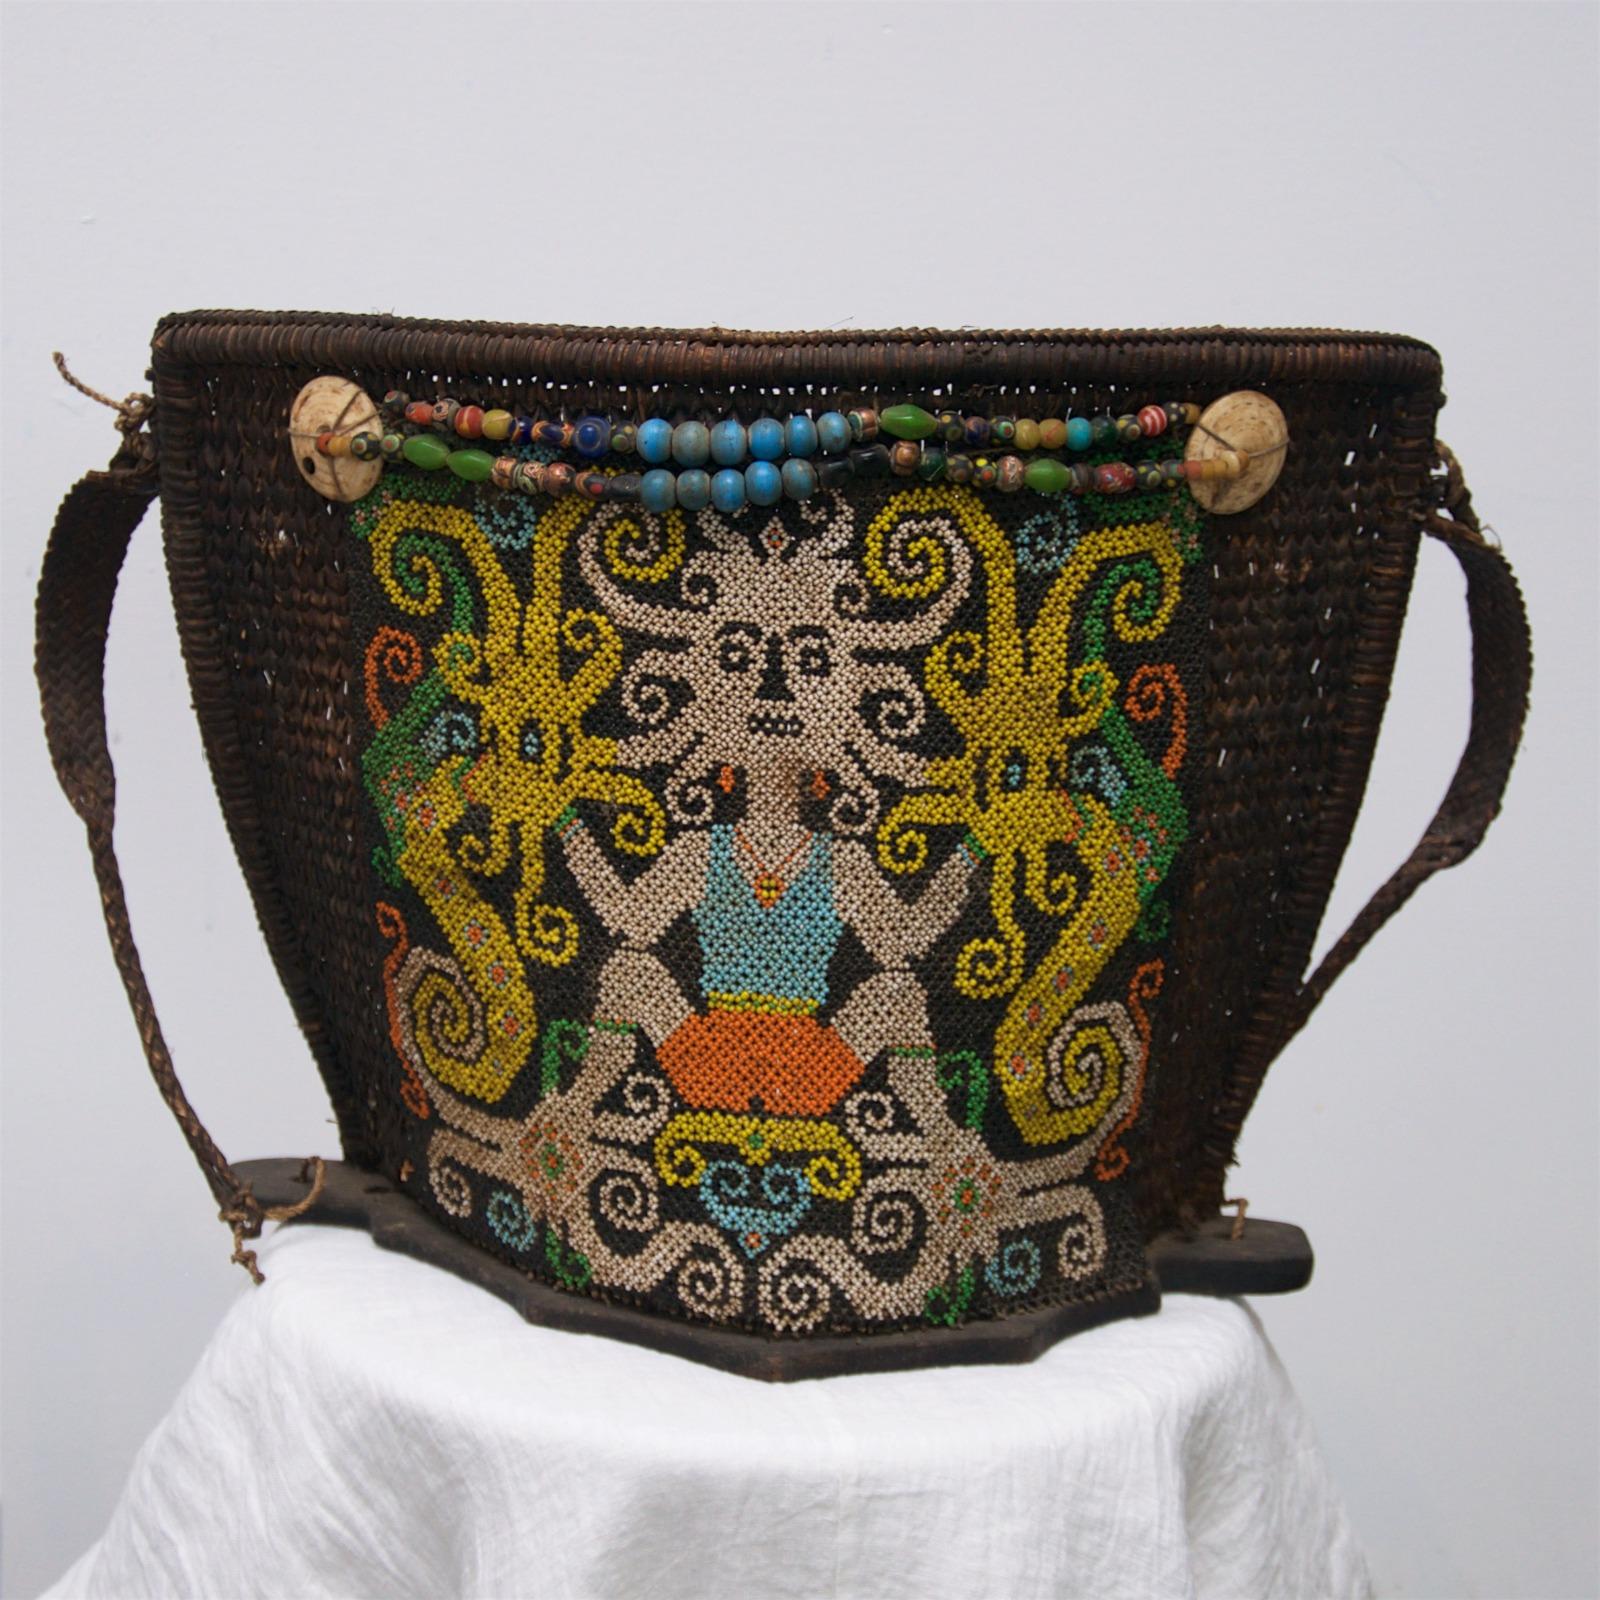 Dayak baby carrier from Borneo, Indonesia, estimated made in mid 1900’s. Colourful bead work depicting tradition mother goddess hand-stitched on rattan grass basket with two shoulder straps. Base is wood. Decorative and valuable bead used to